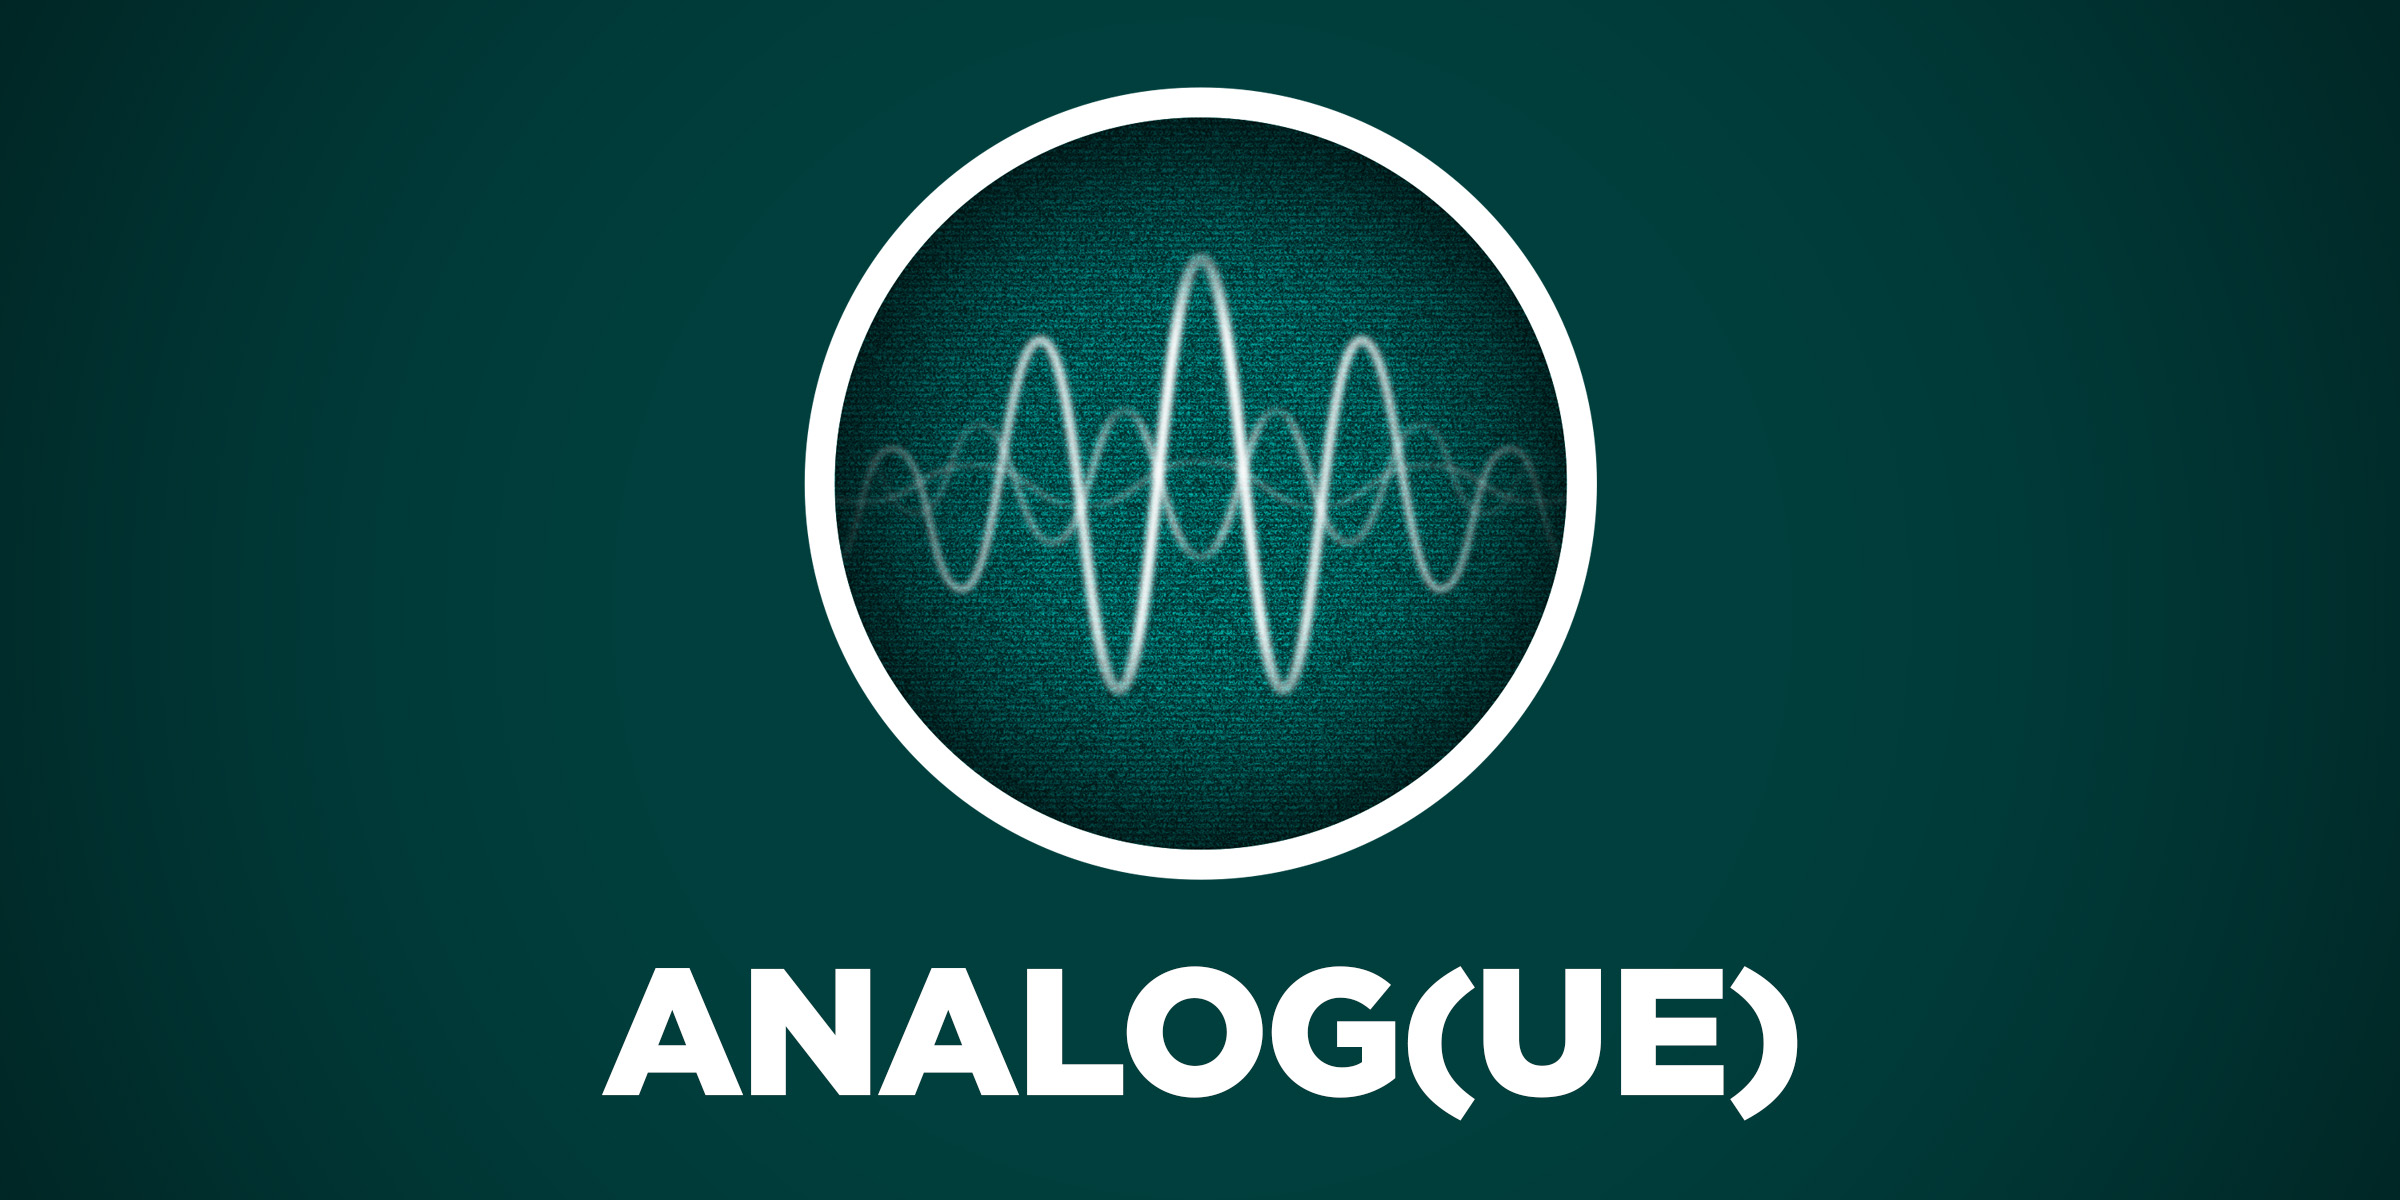 Analog(ue) #195: You Are What You Actually Are